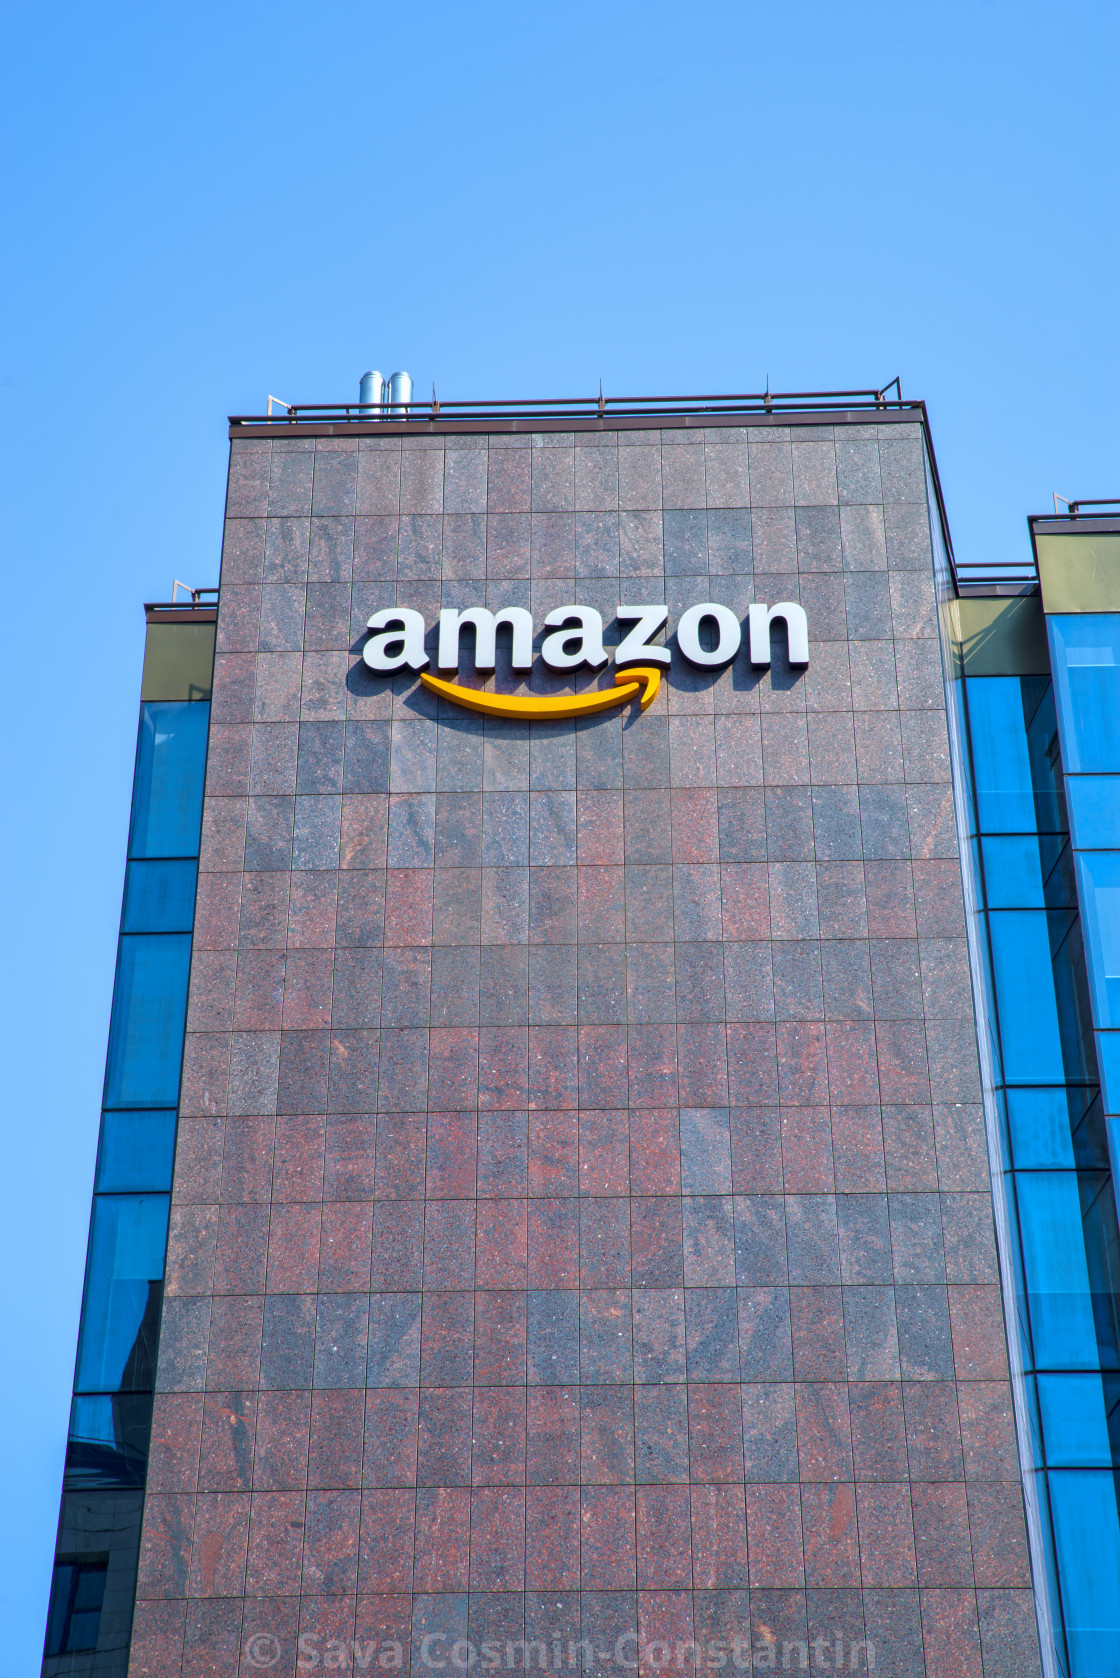 Amazon company logo on office building - License, download or print for  £9.92 | Photos | Picfair